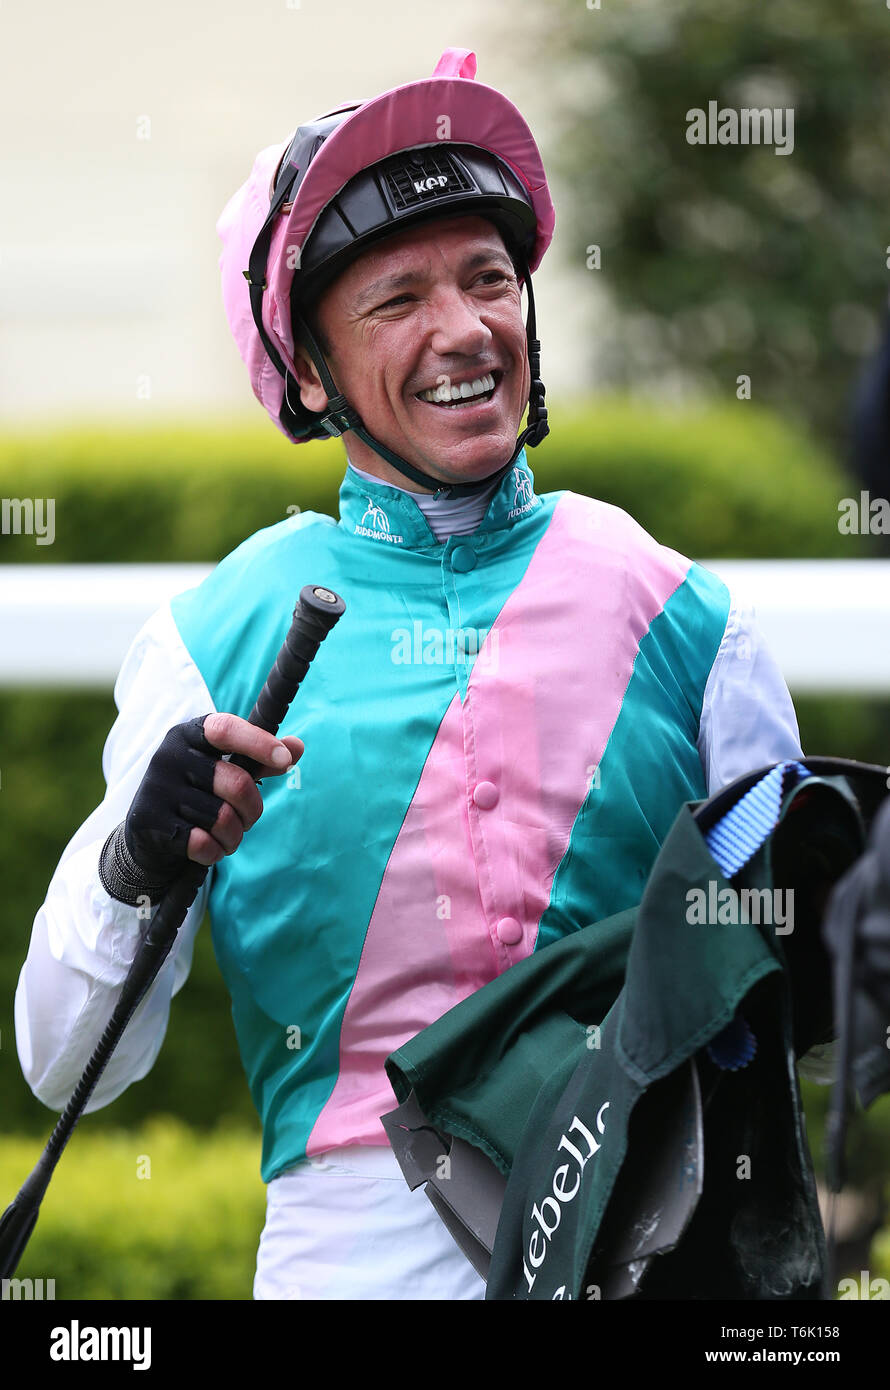 Calyx ridden by Jockey Frankie Dettori after winning the Merriebelle Stable Commonwealth Cup Trial Stakes in the winners parade during Royal Ascot Trials Day at Ascot Racecourse. Stock Photo